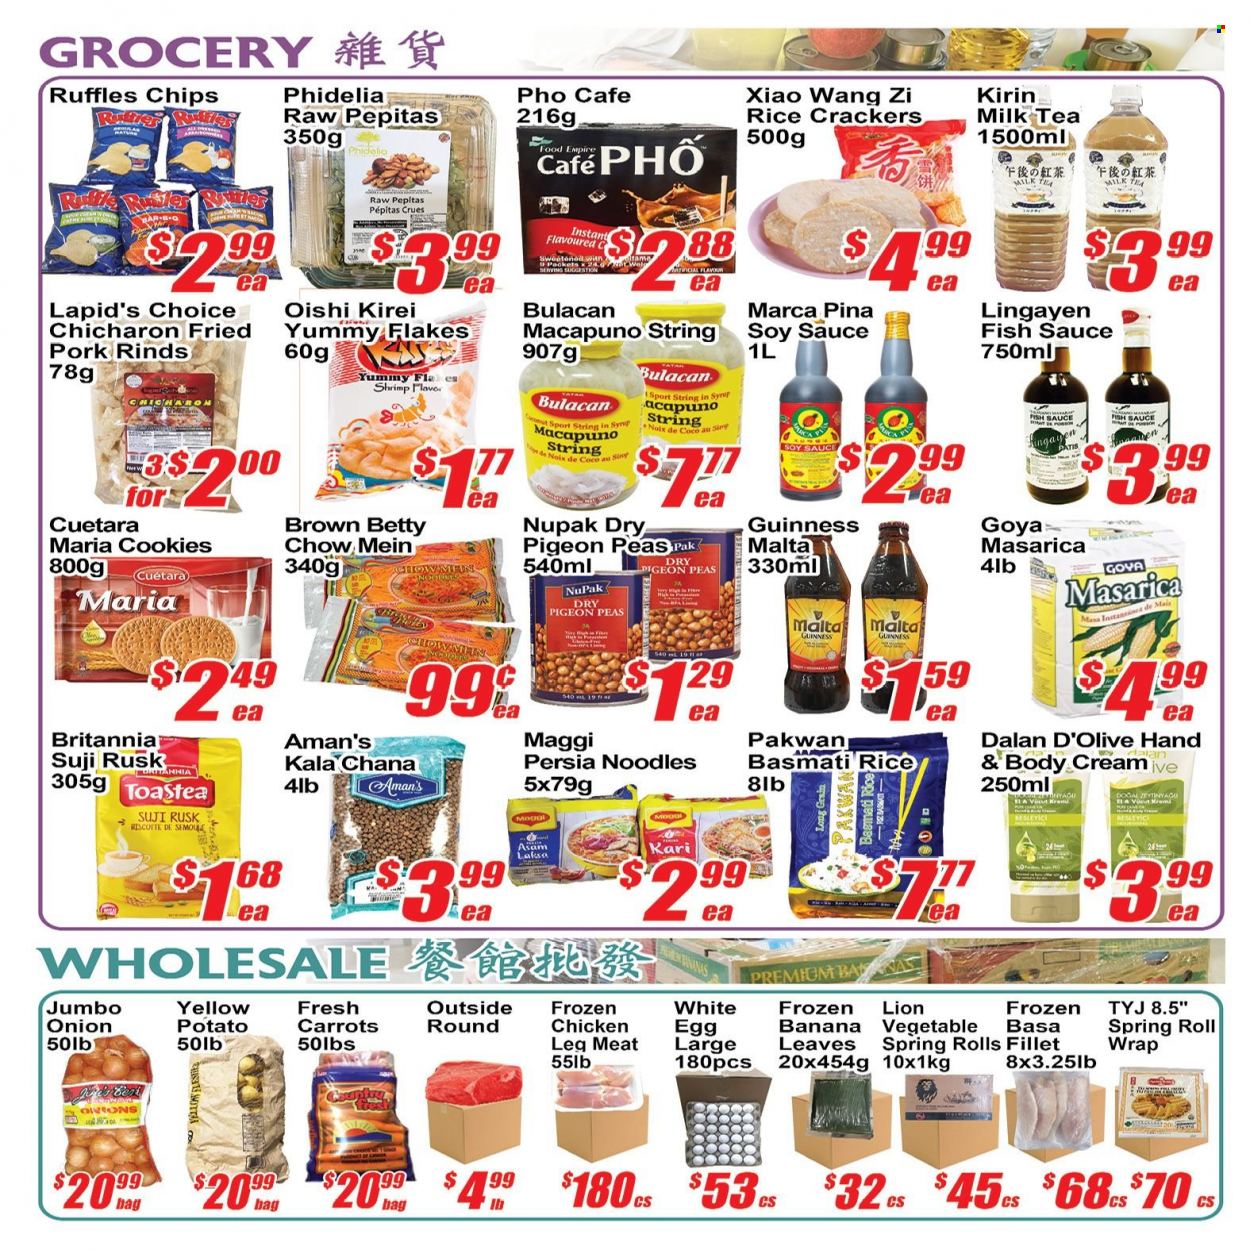 thumbnail - Jian Hing Supermarket Flyer - November 25, 2022 - December 01, 2022 - Sales products - pie, rusks, carrots, peas, onion, fish, shrimps, sauce, spring rolls, noodles, milk, eggs, cookies, crackers, rice crackers, Ruffles, Maggi, Goya, basmati rice, toor dal, fish sauce, soy sauce, tea, Guinness, chicken legs. Page 2.